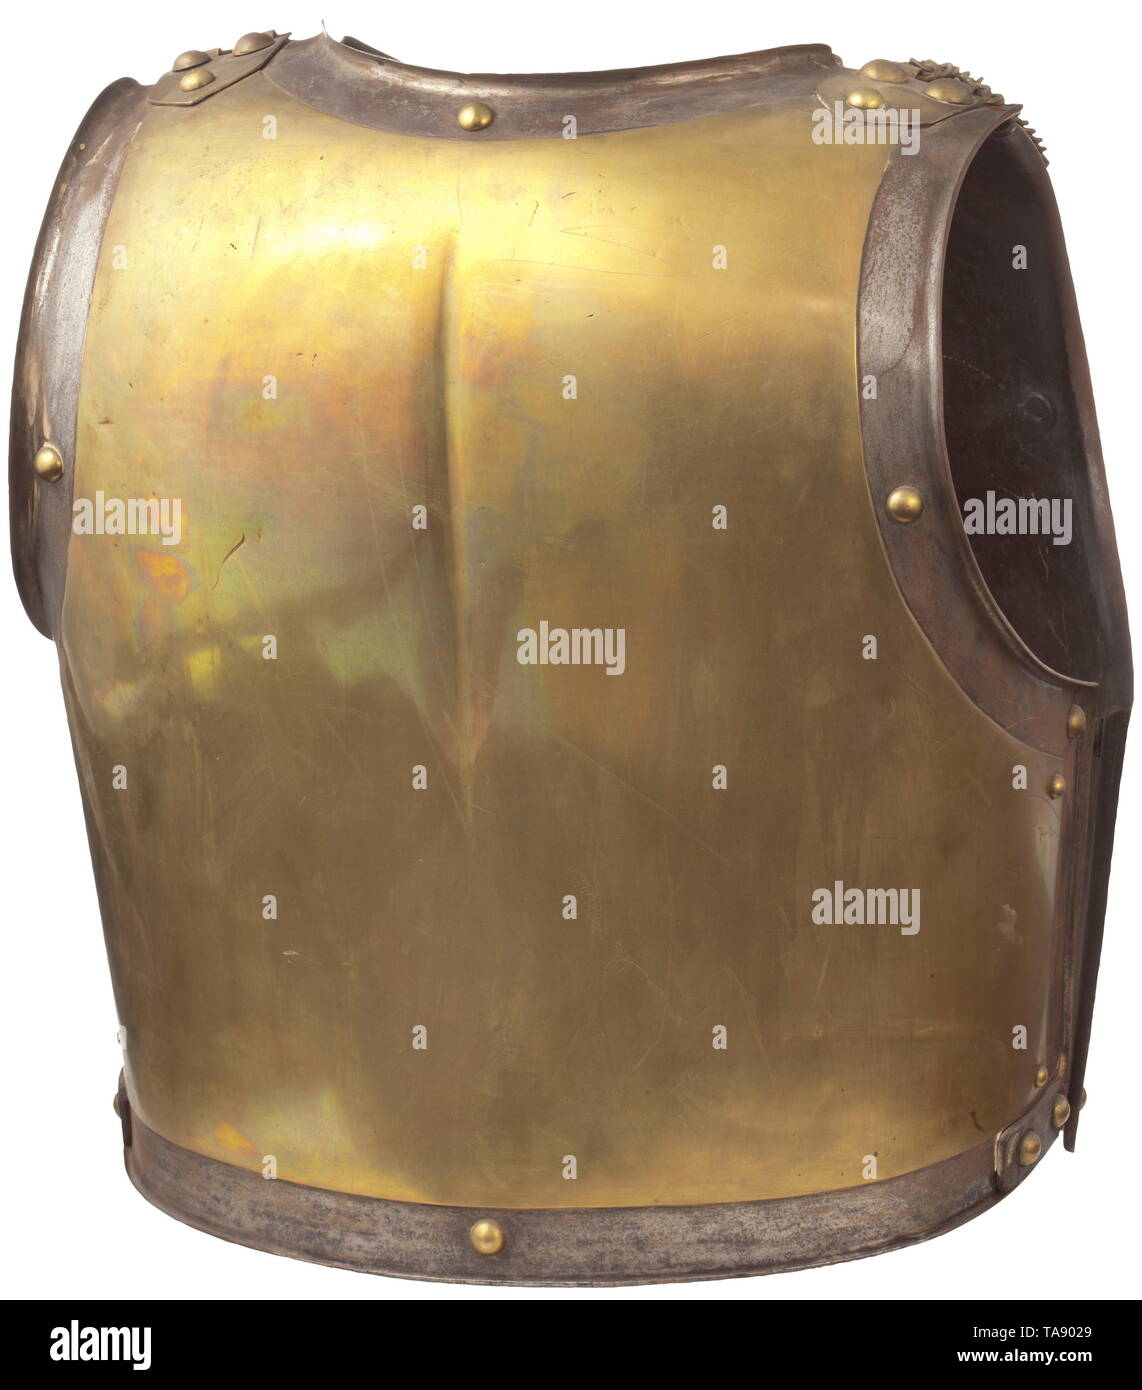 An M 1825 breastplate for enlisted Carabiniers of the Garde Impériale Steel, brass, leather. The breastplate stamped with the maker's signature Klingenthal 1846 and the marks '1846 C' and '2T 1L', together with the eagle emblem in a sun burst, screwed on the back with two wing nuts. The backplate with maker's mark Klingenthal 1831, the leather shoulder straps overlaid with chains (leather torn), the waist belt torn. Signs of age and use. Rare. historic, historical, 19th century, Europe, 19th century, Additional-Rights-Clearance-Info-Not-Available Stock Photo